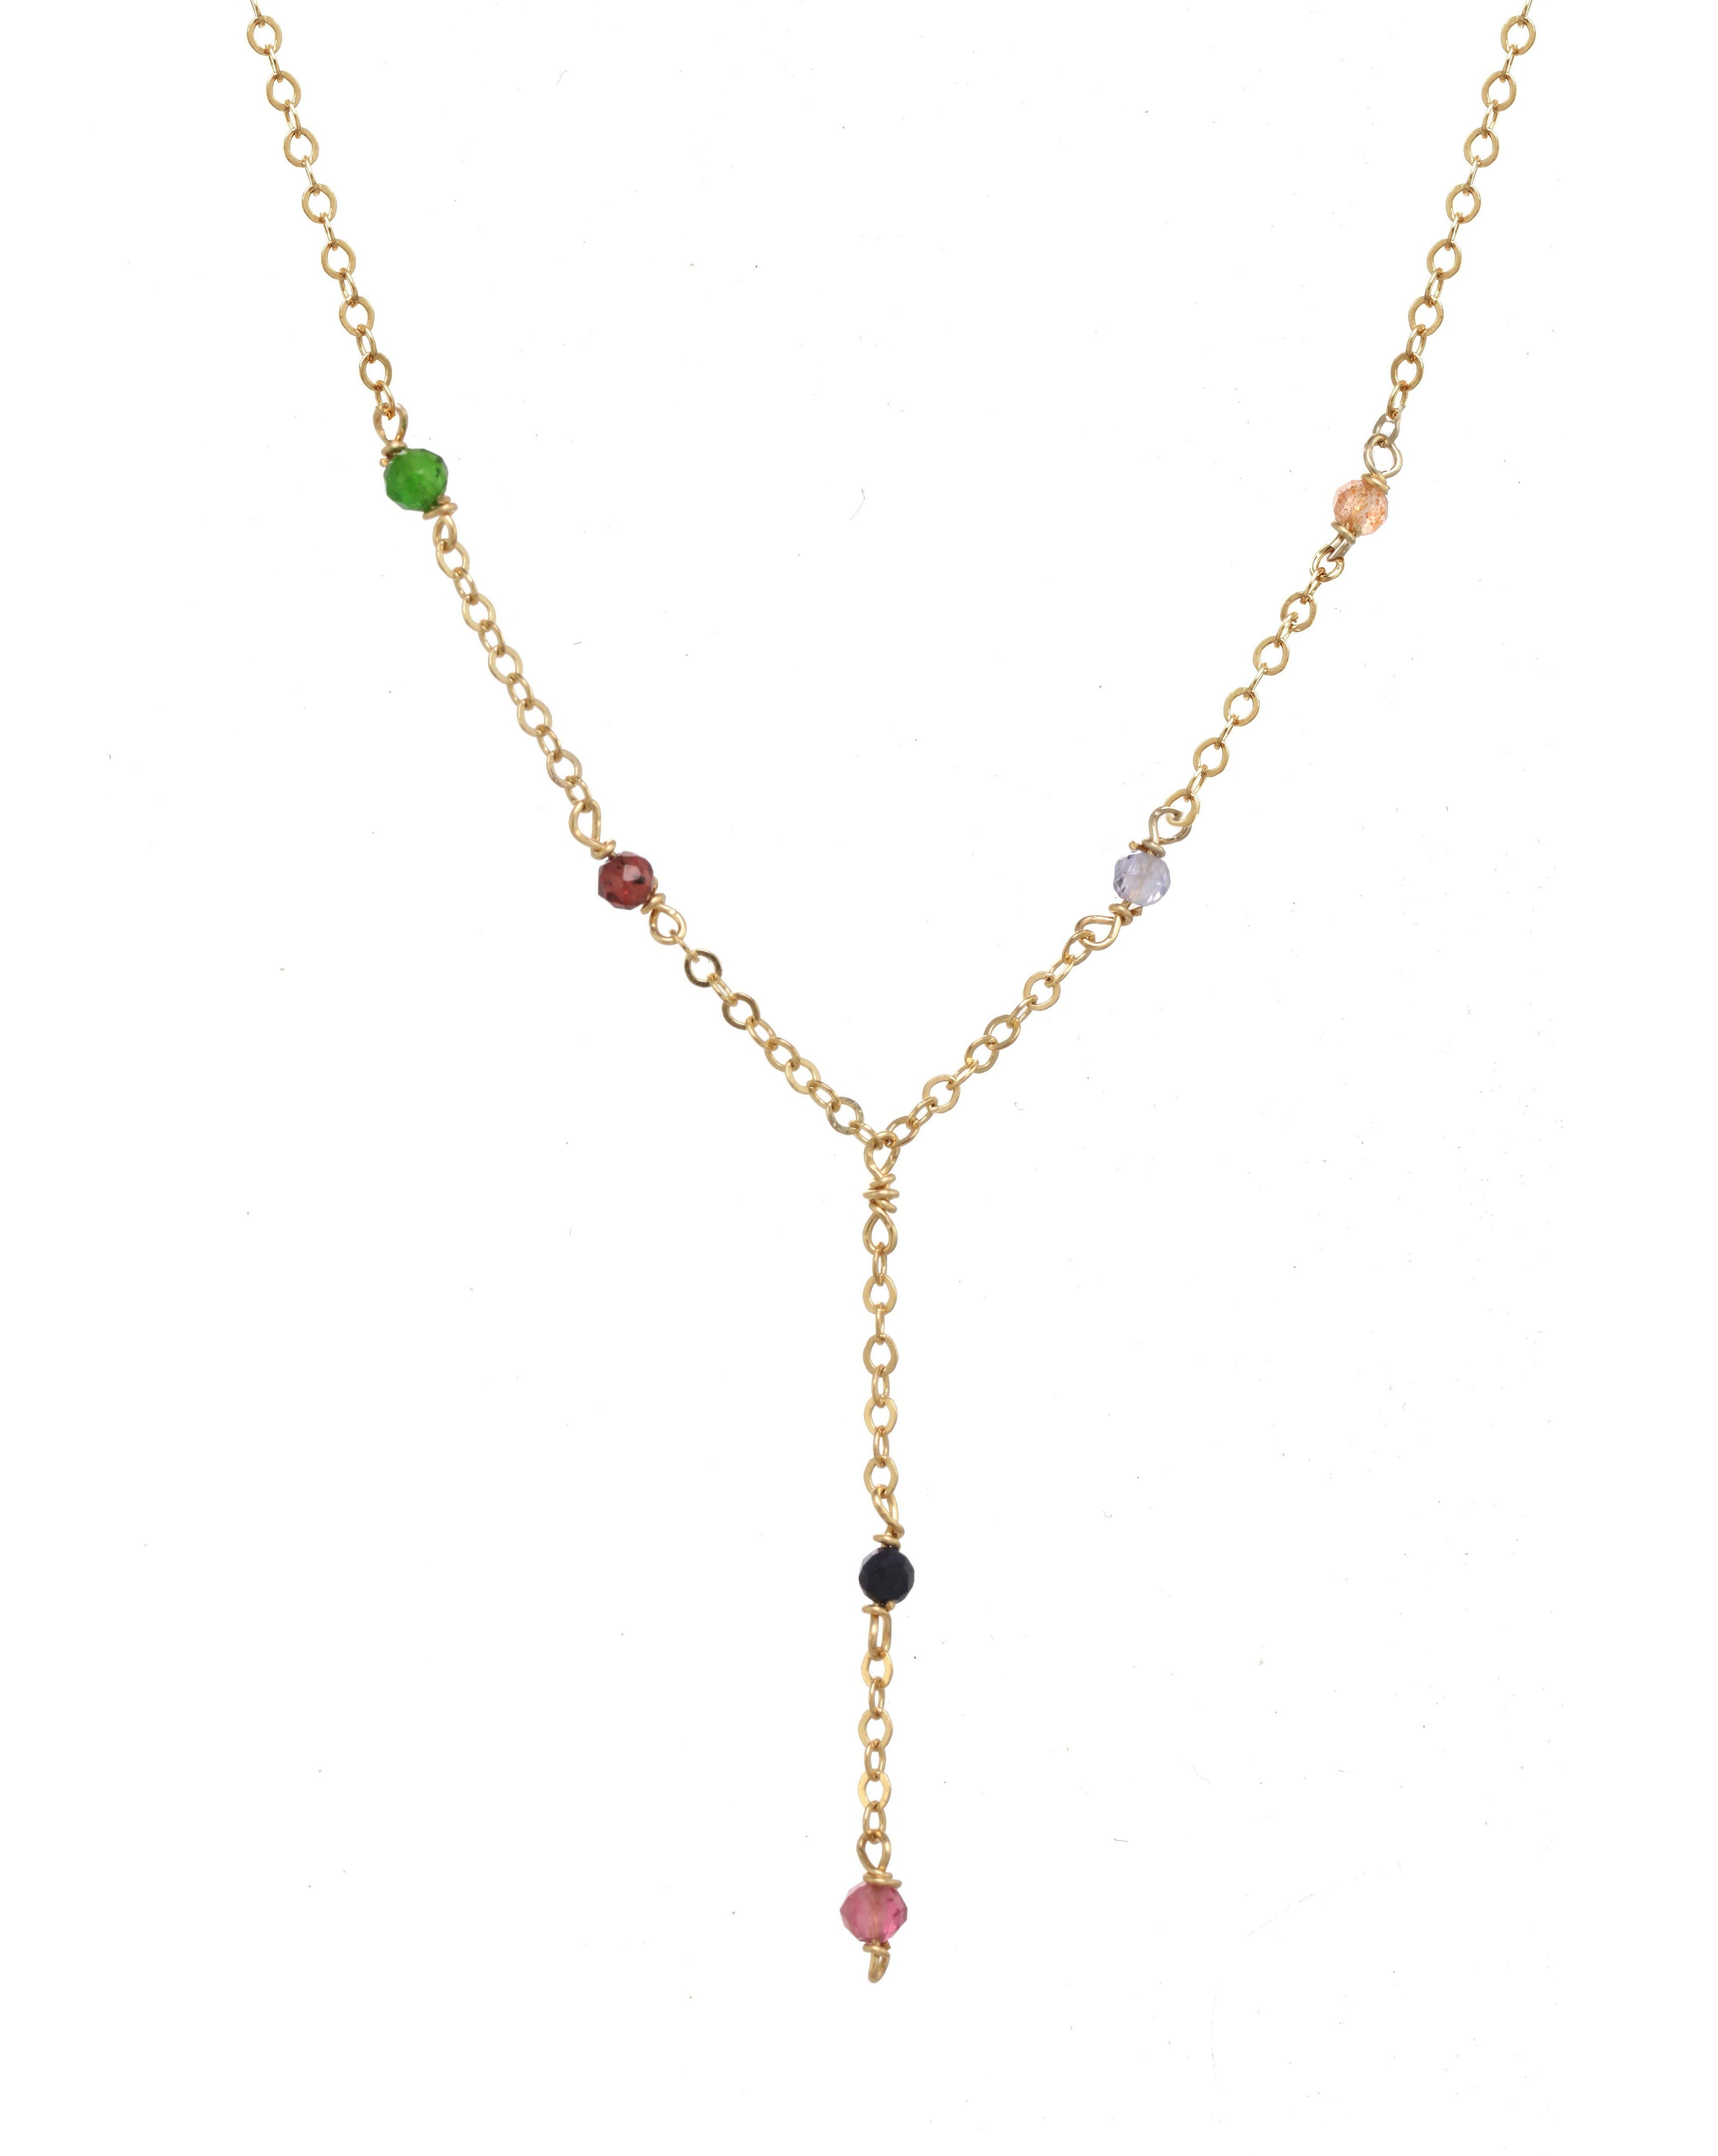 Safron Necklace by KOZAKH. A 16 to 18 inch adjustable length, lariat style necklace, crafted in 14K Gold Filled, featuring 2mm Faceted round Emerald, Garnet, Sapphire, Tourmaline, Tanzanite and Topaz.